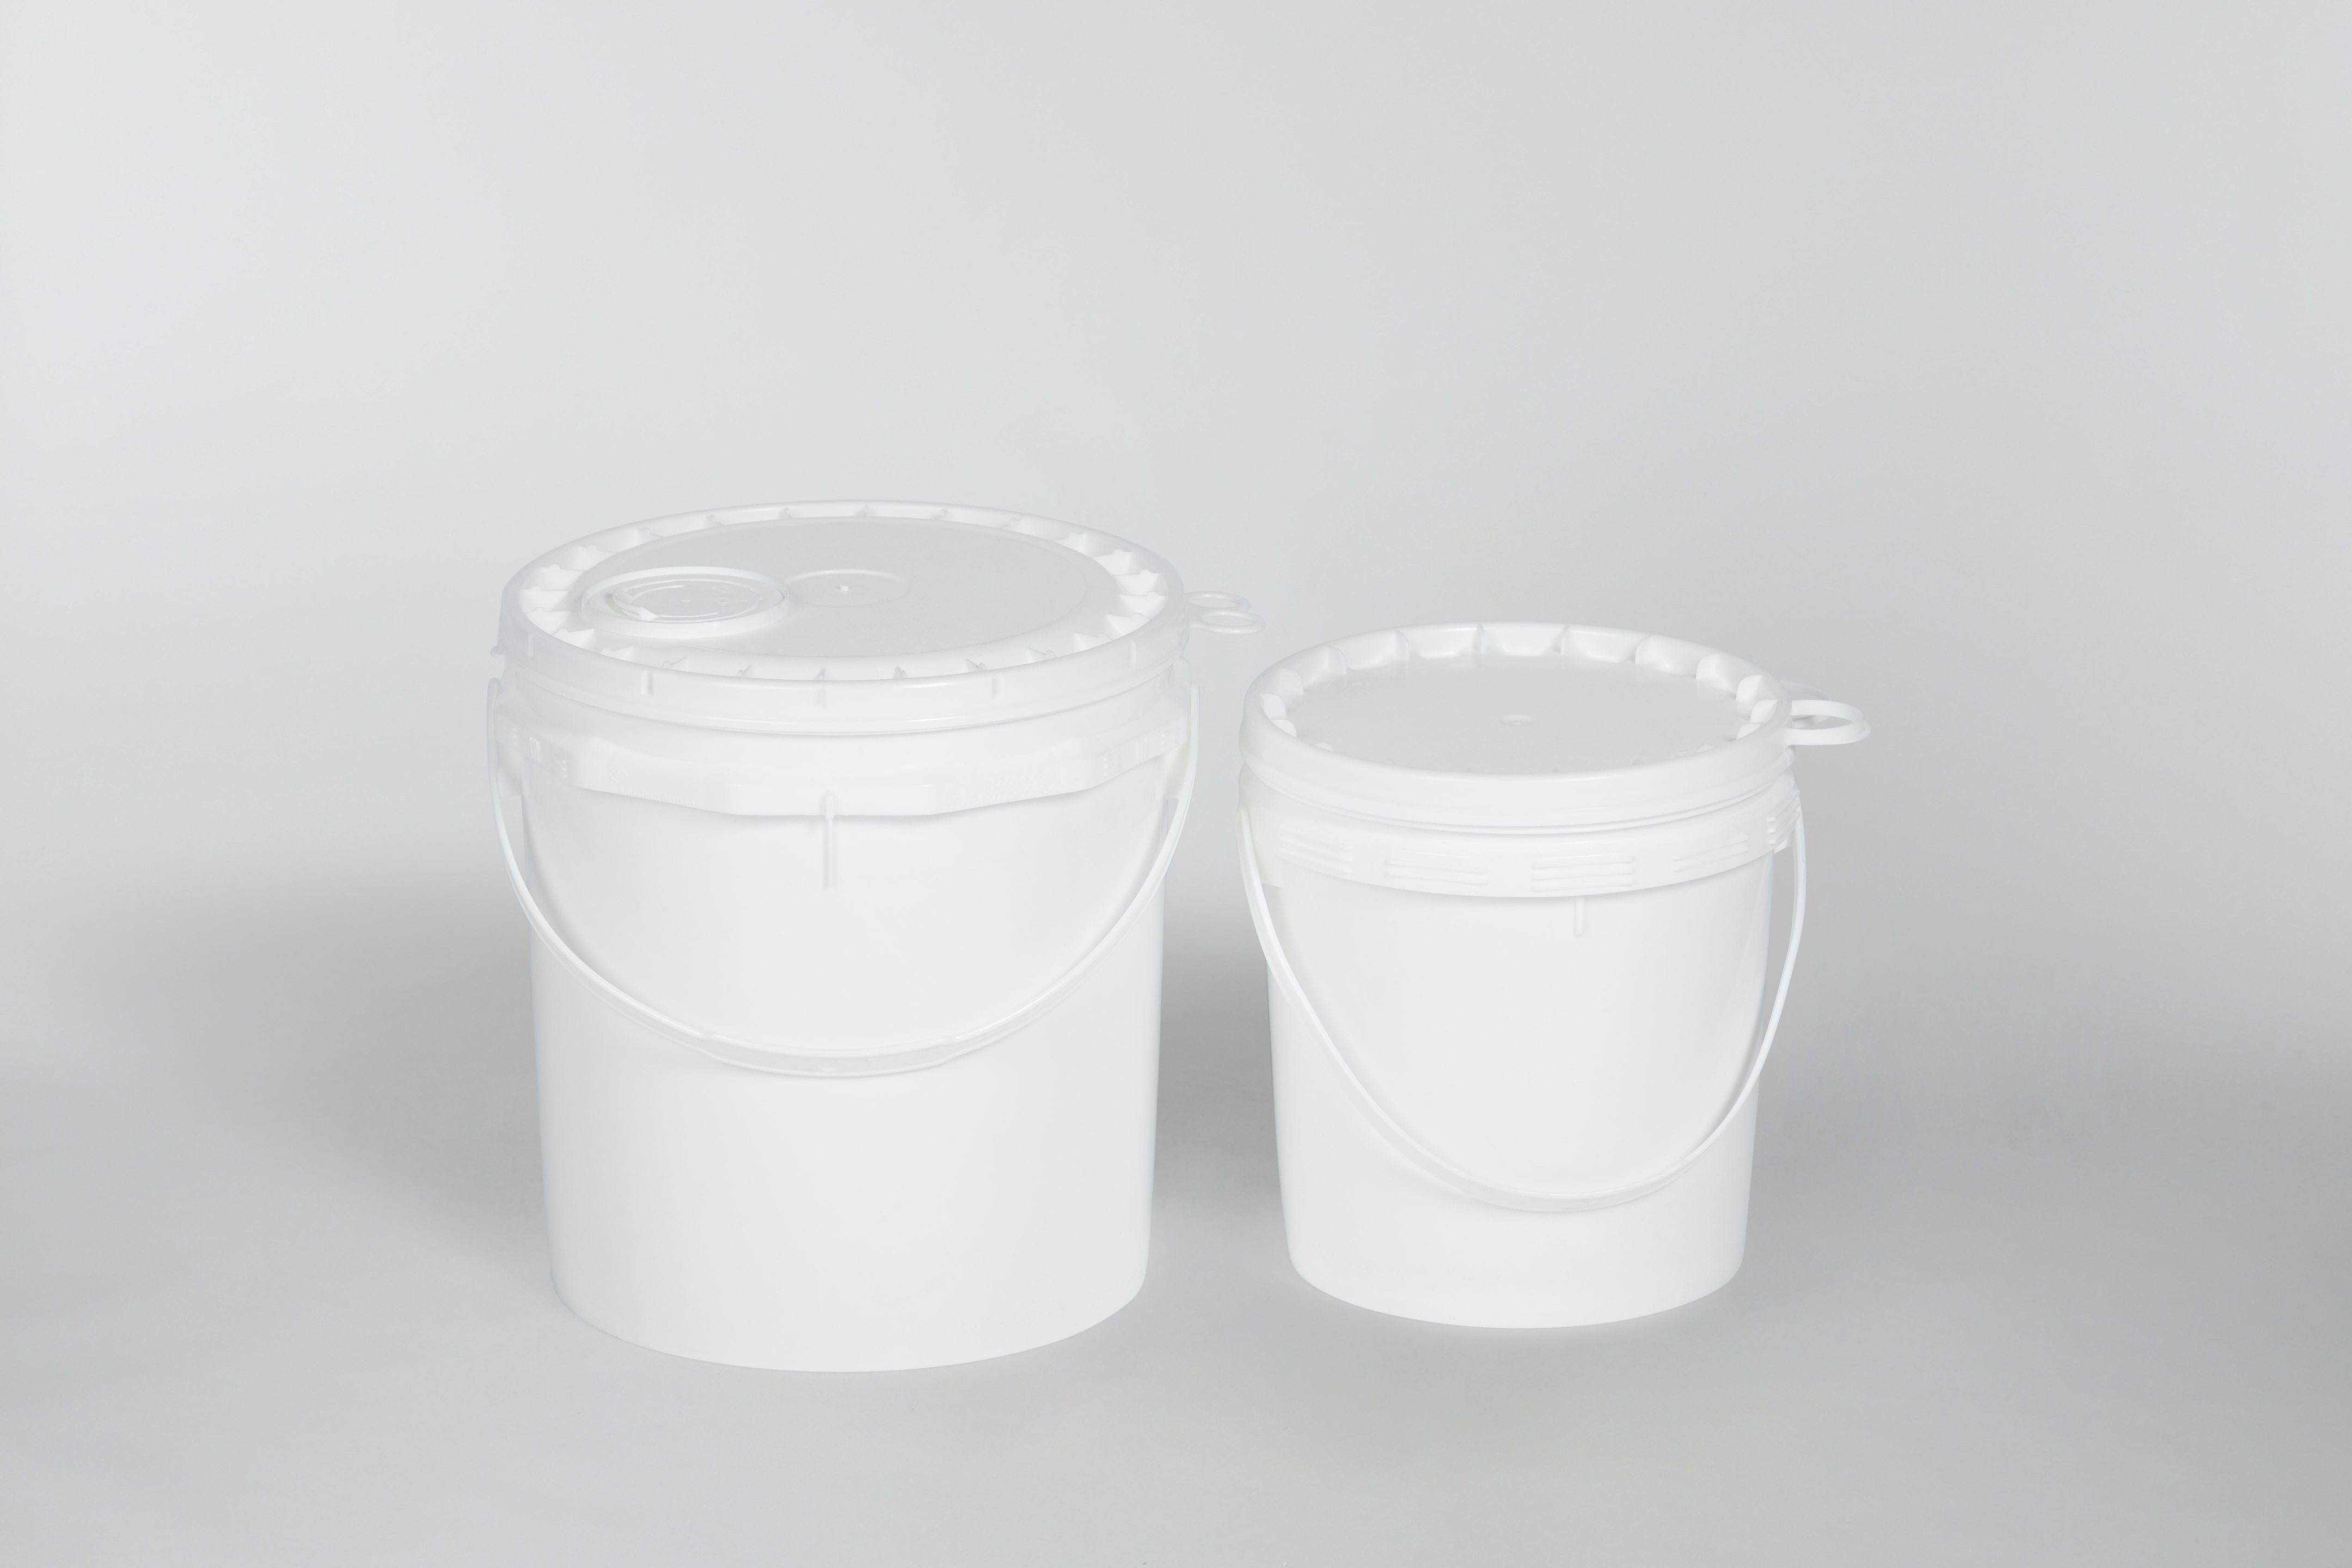 Ropac Secure Plastic Pails for Solids